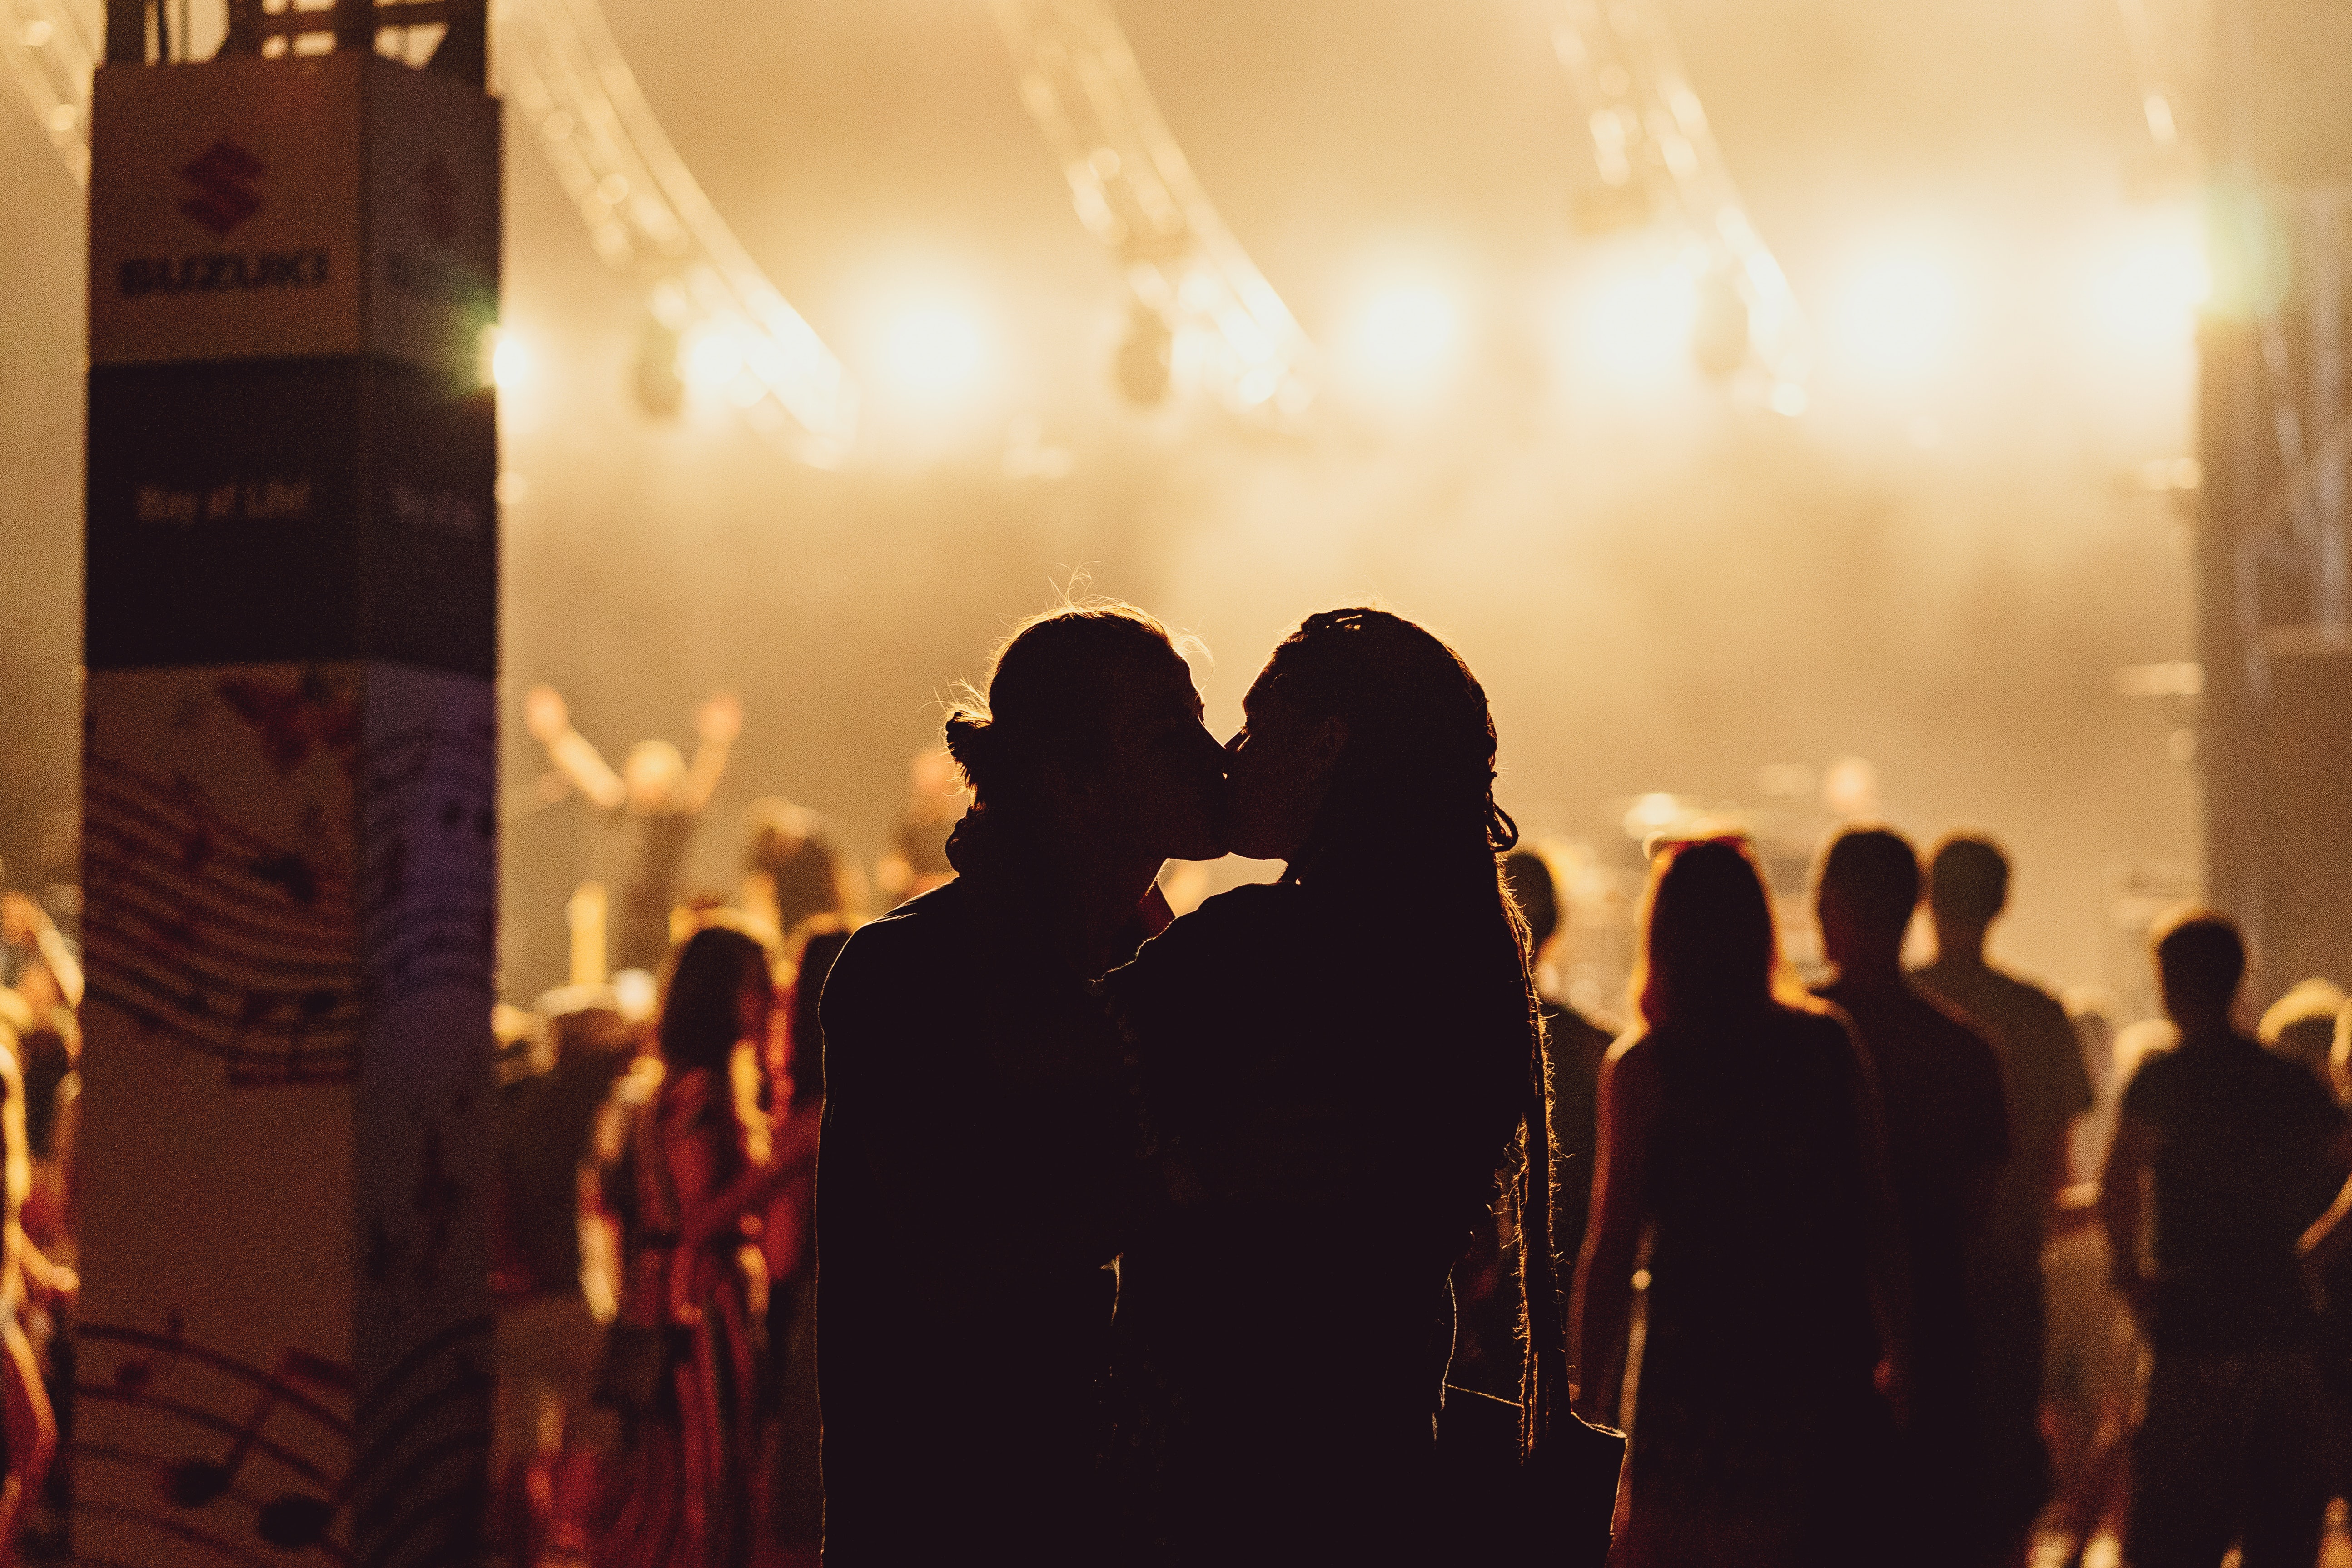 Shadowy figures of man and woman kissing during a concert